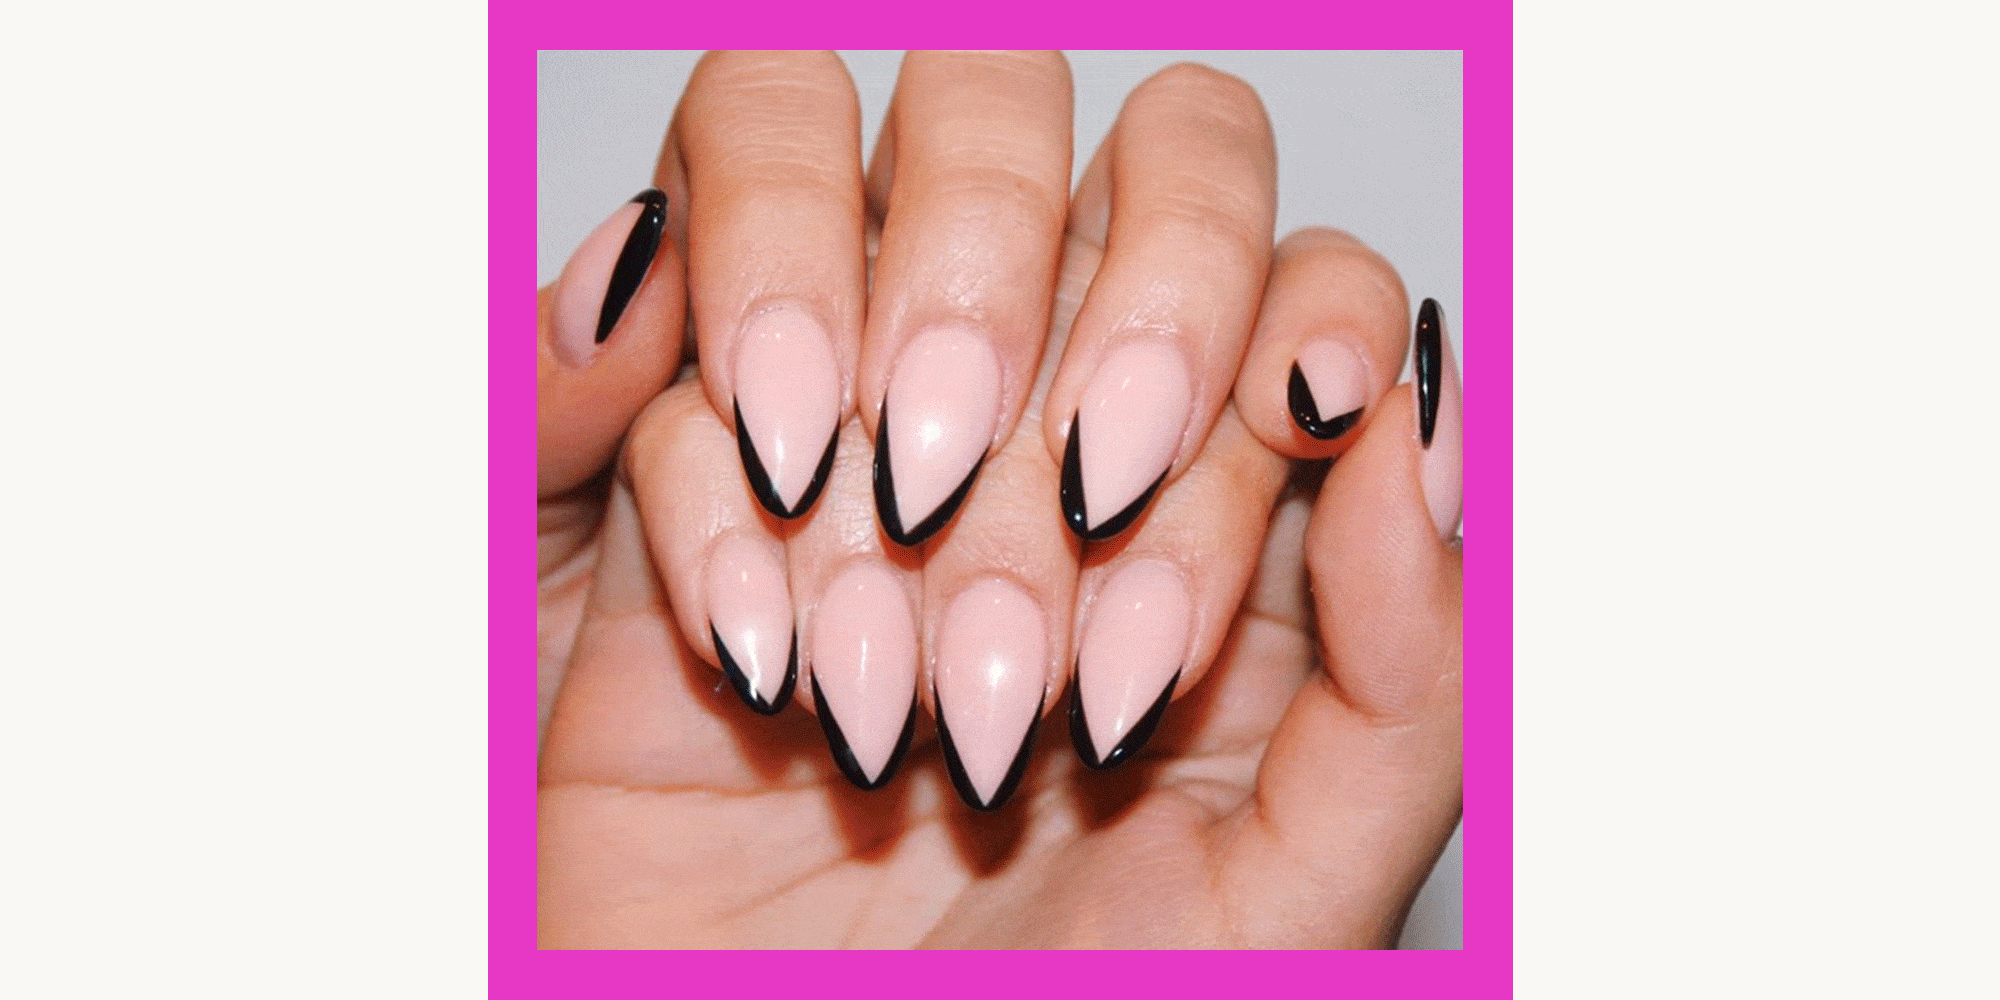 Amazon.com: Aularso French Press on Nails Long Stiletto Fake Nails Flower  Black False Nails Glossy Full Cover Acrylic Nails Design Faux Fingernails  Instant Clip on Nails Solid Stick on Nials for Women